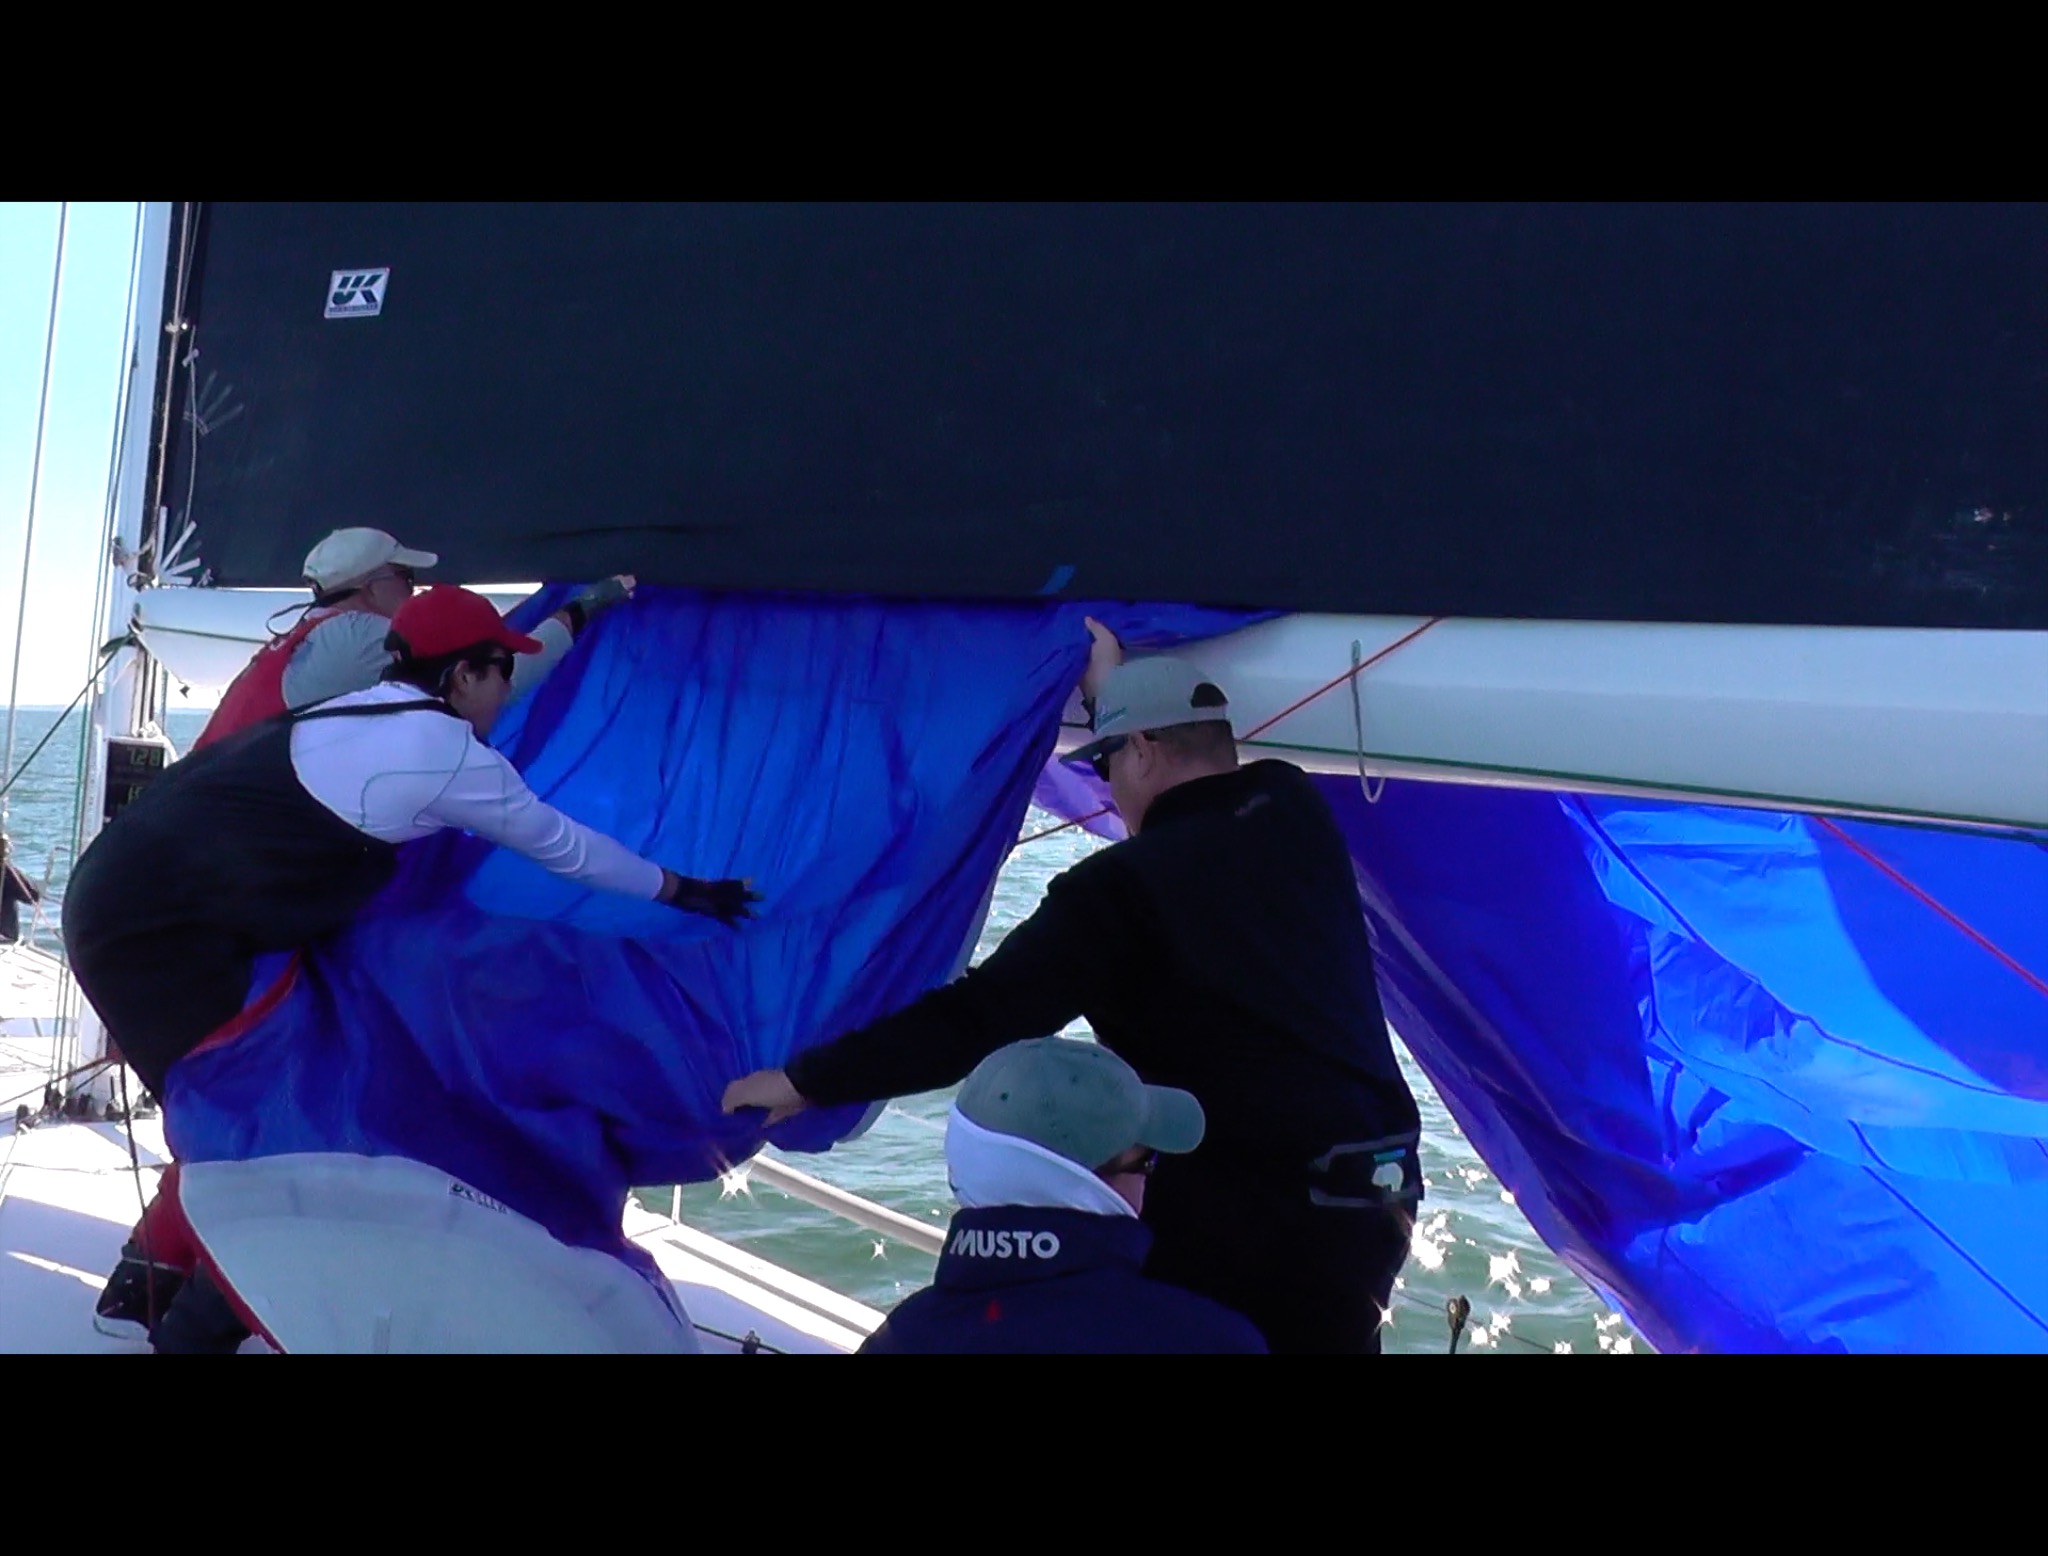 In the Letter Box take down, the spinnaker is pulled over the boom and under the foot of the mainsail before being stuff through the companion way hatch.